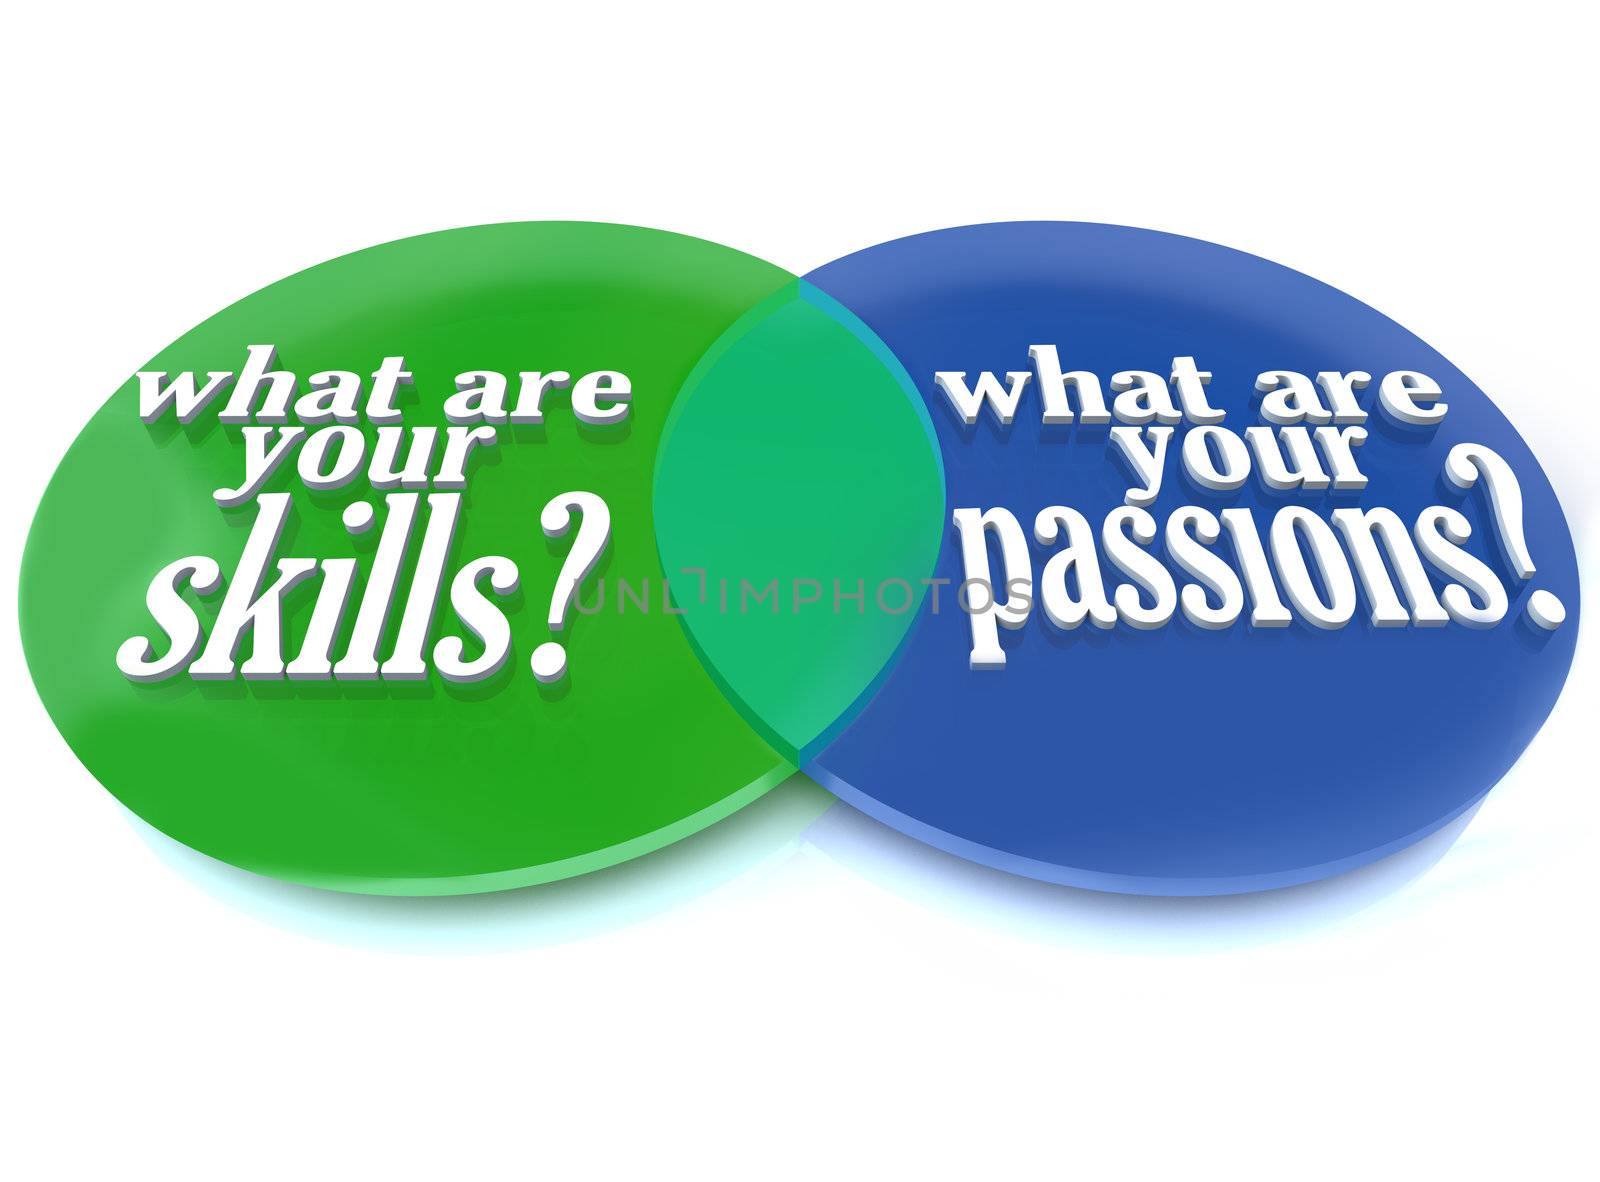 A Venn diagram of overlapping circles analyzing what are your skills and passions to help you determine a career path